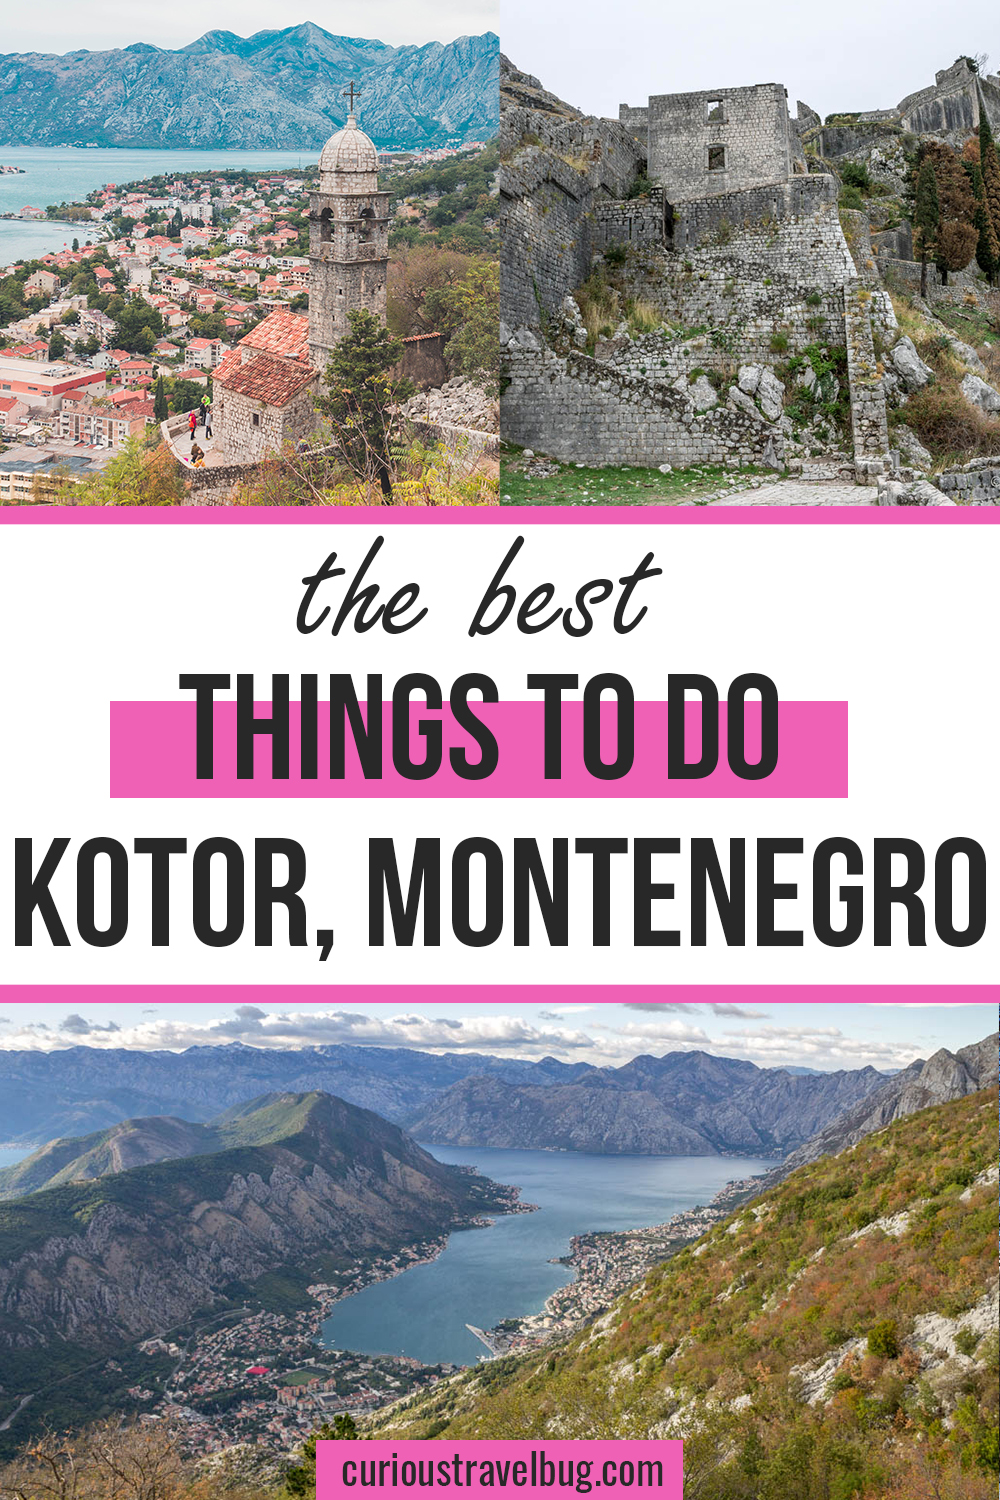 All the best things to do in Kotor including walking the walls above the city, the best places to get a view of Kotor Bay and the best day trip. Perfect itinerary for a day trip from Dubrovnik or as a one night vacation to Montenegro.